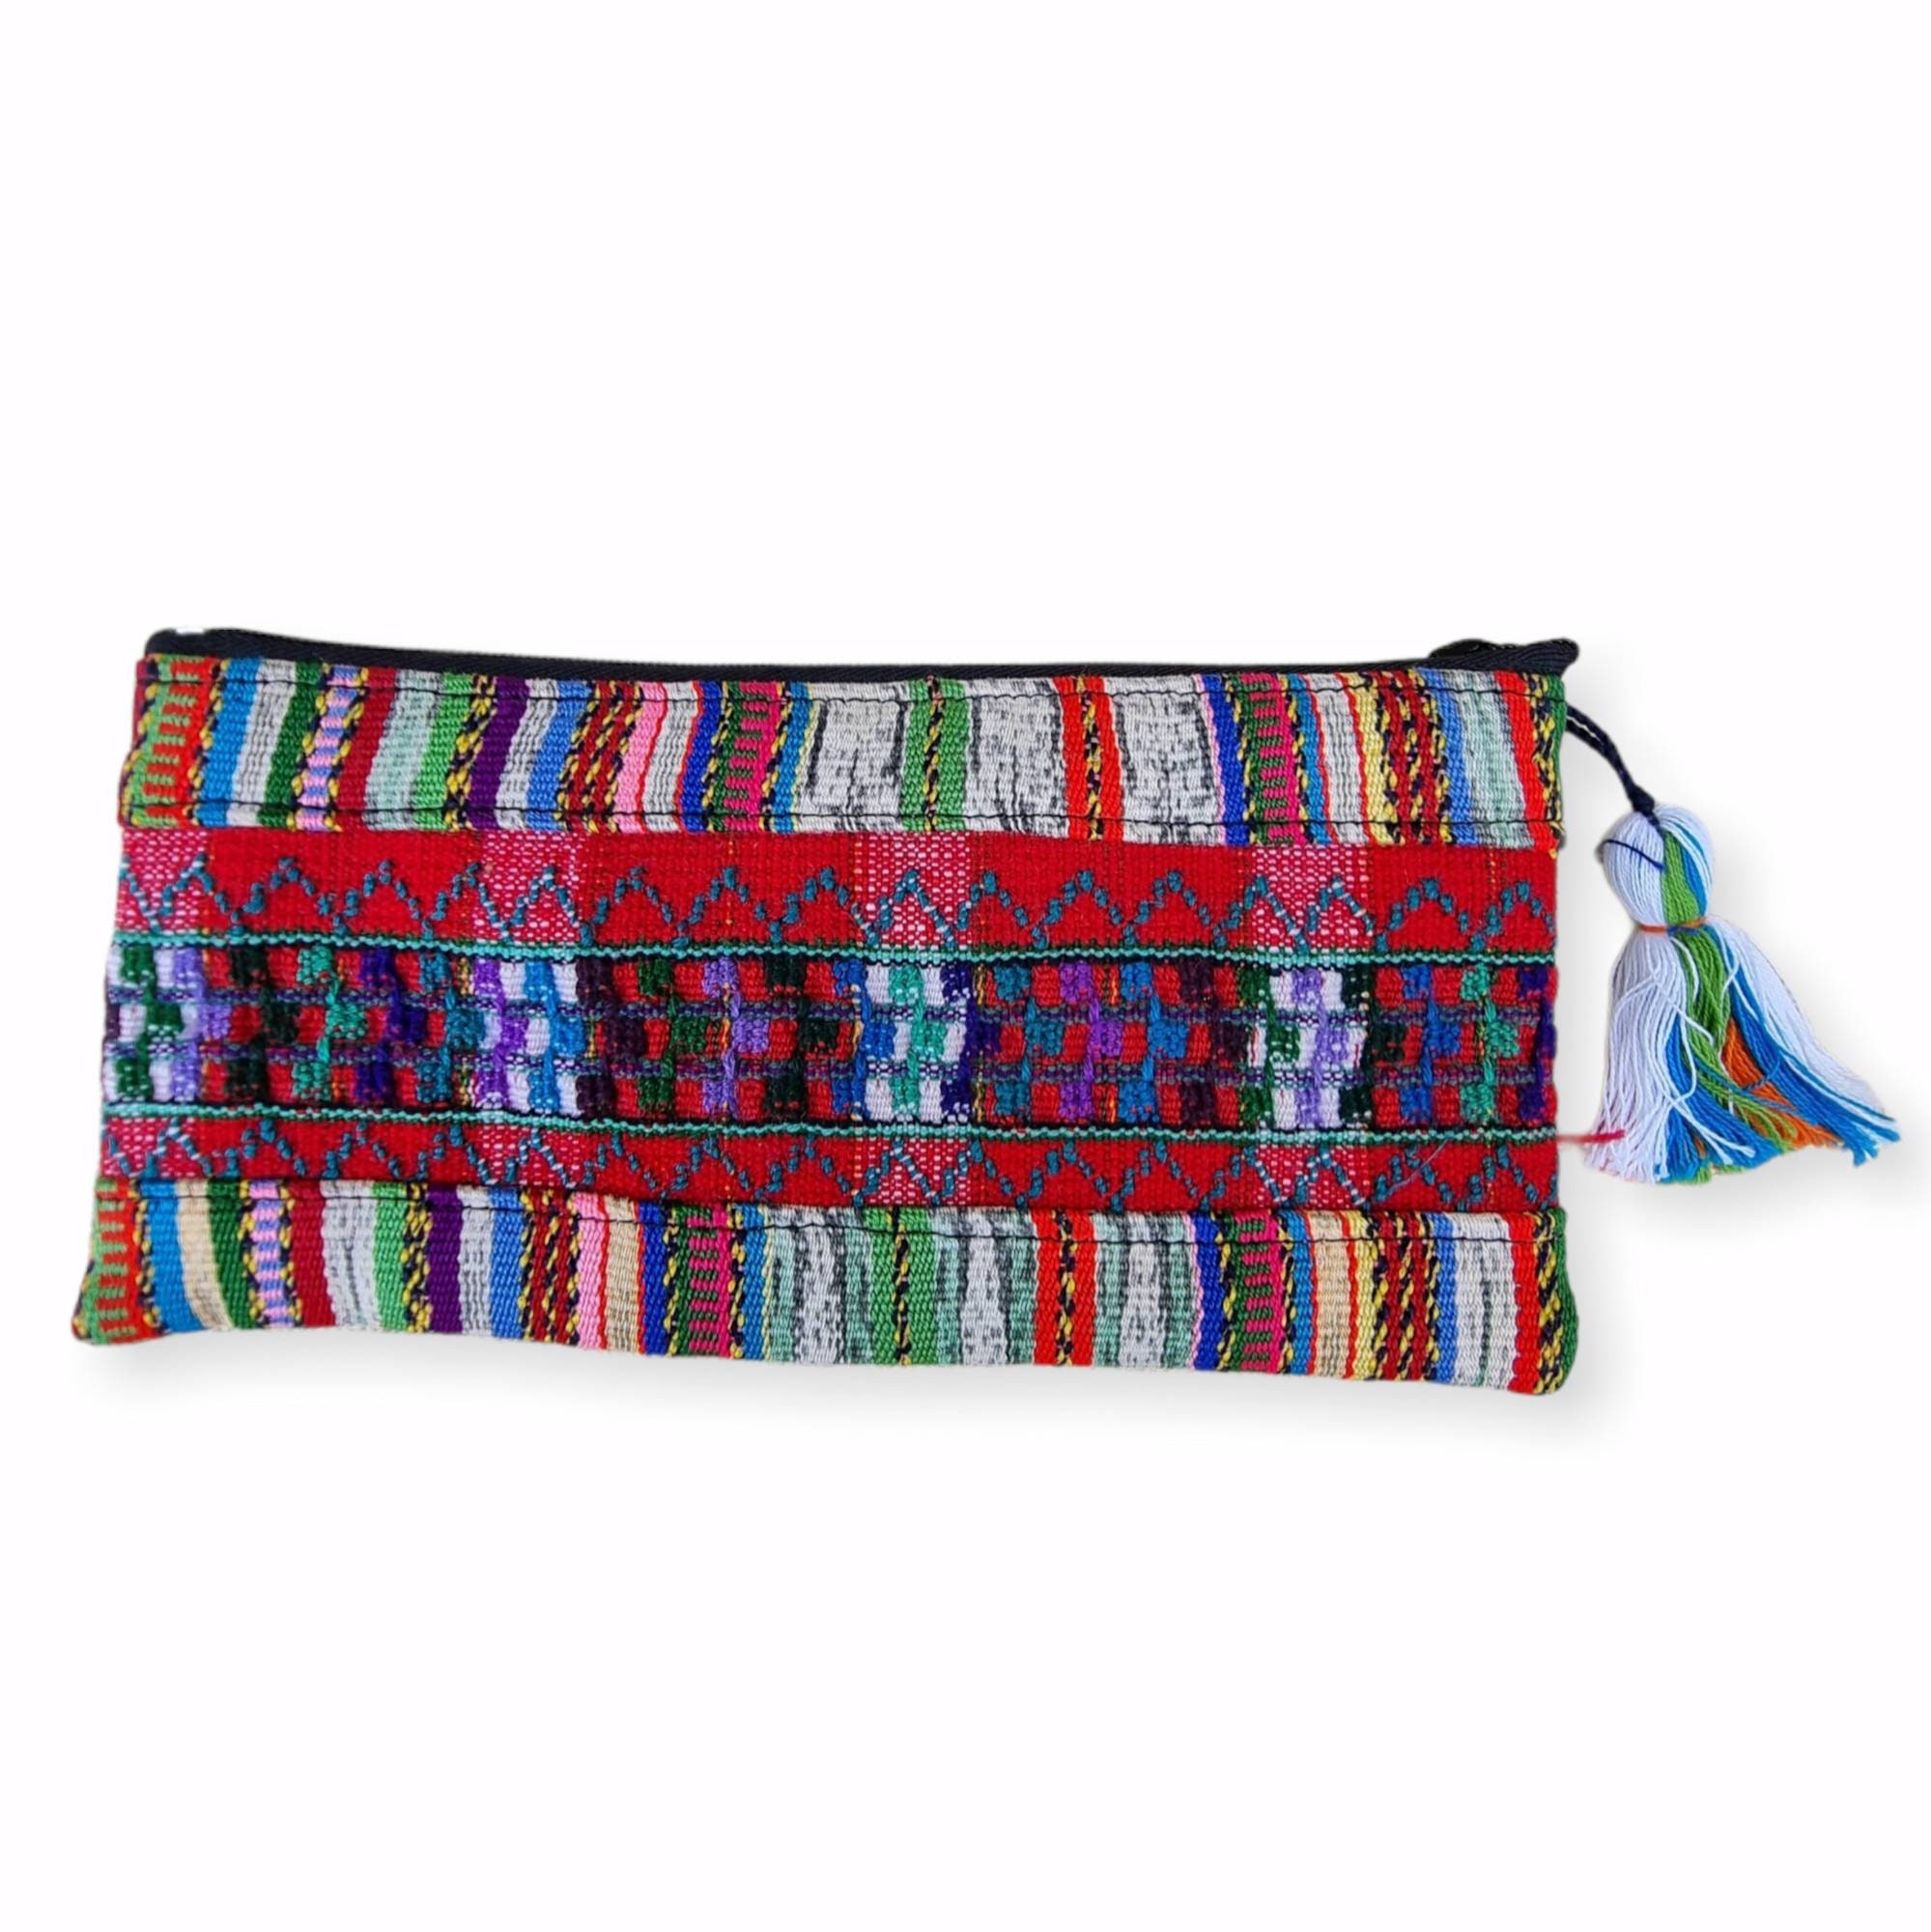 Blue Fabric wallet Handwoven Zipper Pouch Mexican Accessory Bag Woven Tribal Pouch Guatemalan Accessory Clutch